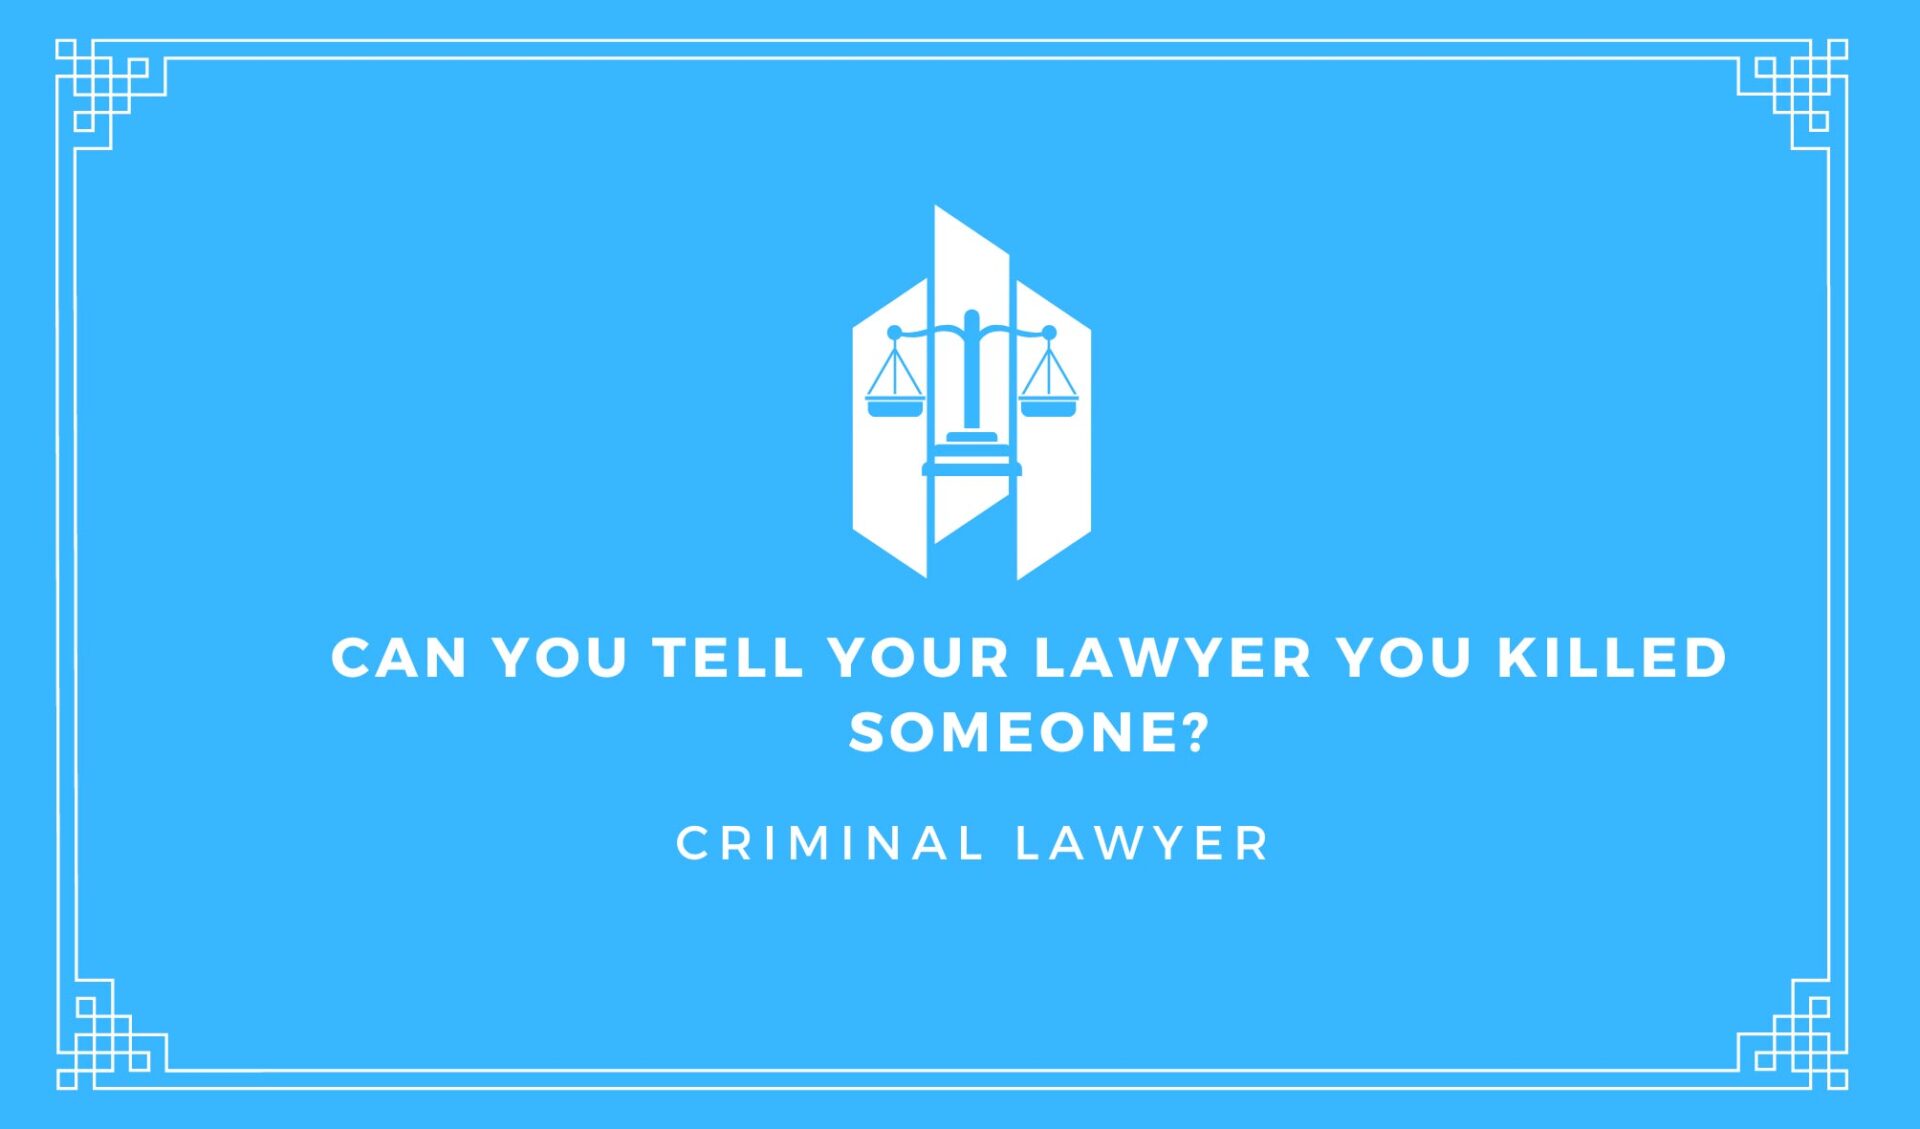 Can-You-Tell-Your-Lawyer-You-Killed-Someone